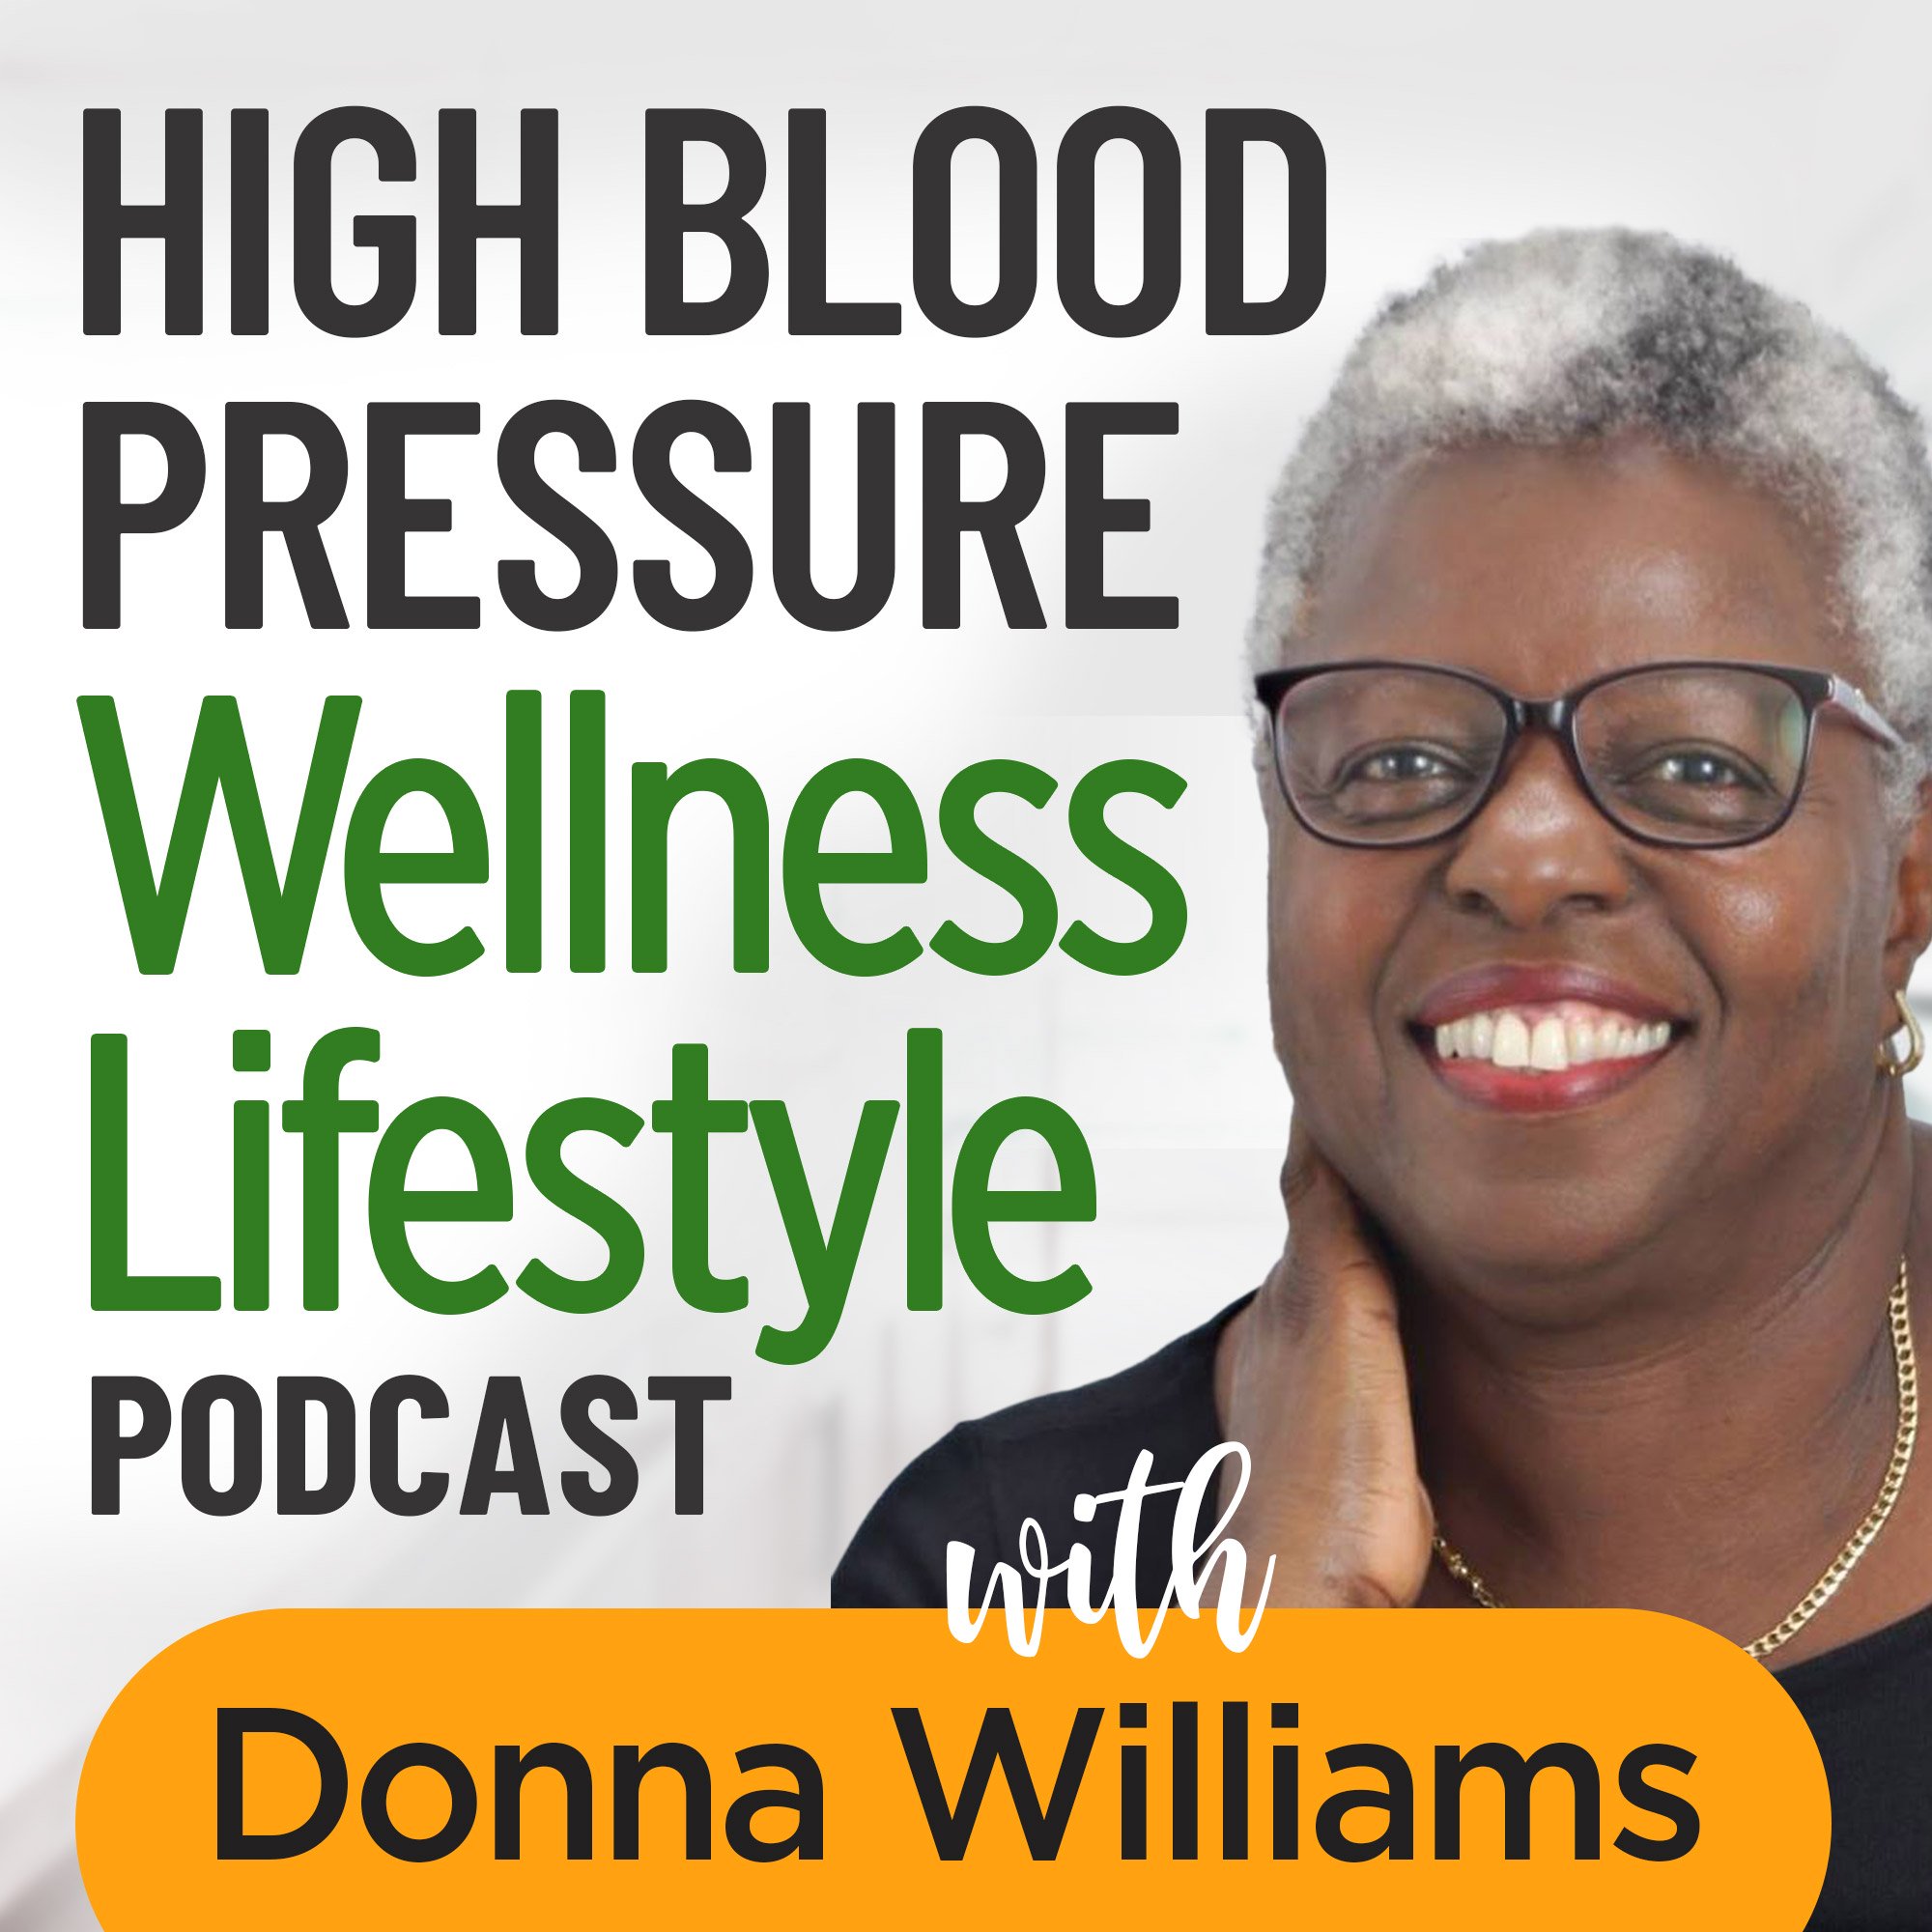 hbp podcast picture.  https://www.info-on-high-blood-pressure.com/foundations-of-mindful-movements.html